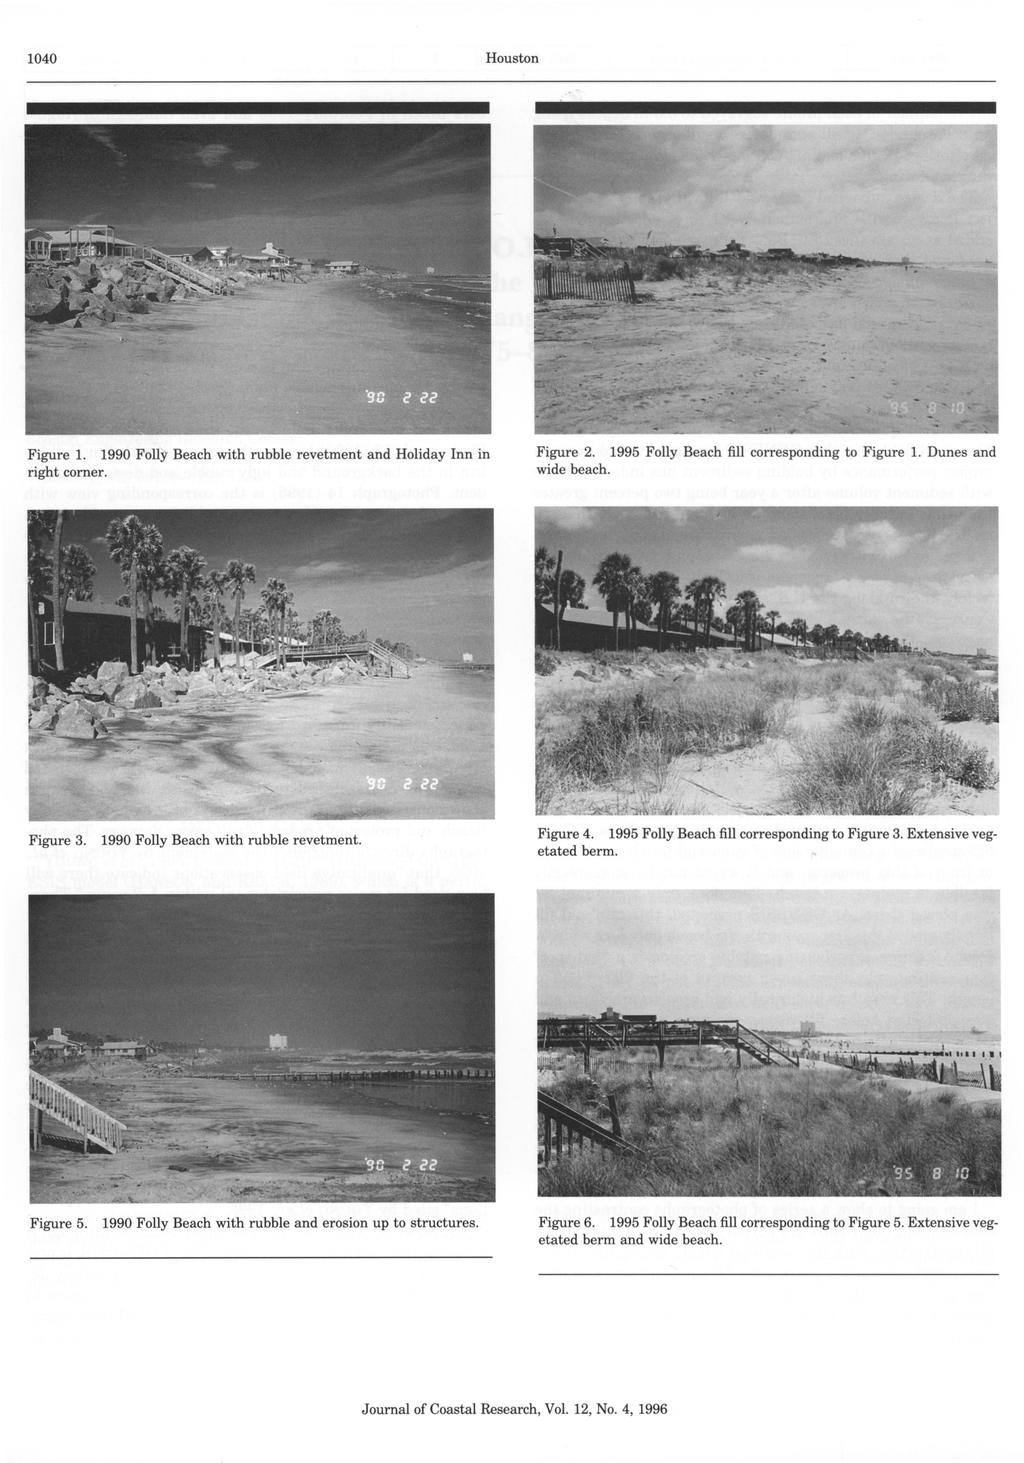 Houston 1040 Figure 1. 1990 Folly Beach with rubble revetment and Holiday Inn in right corner. Figure 2. 1995 Folly Beach fill corresponding to Figure 1. Dunes and wide beach. Figure 3.